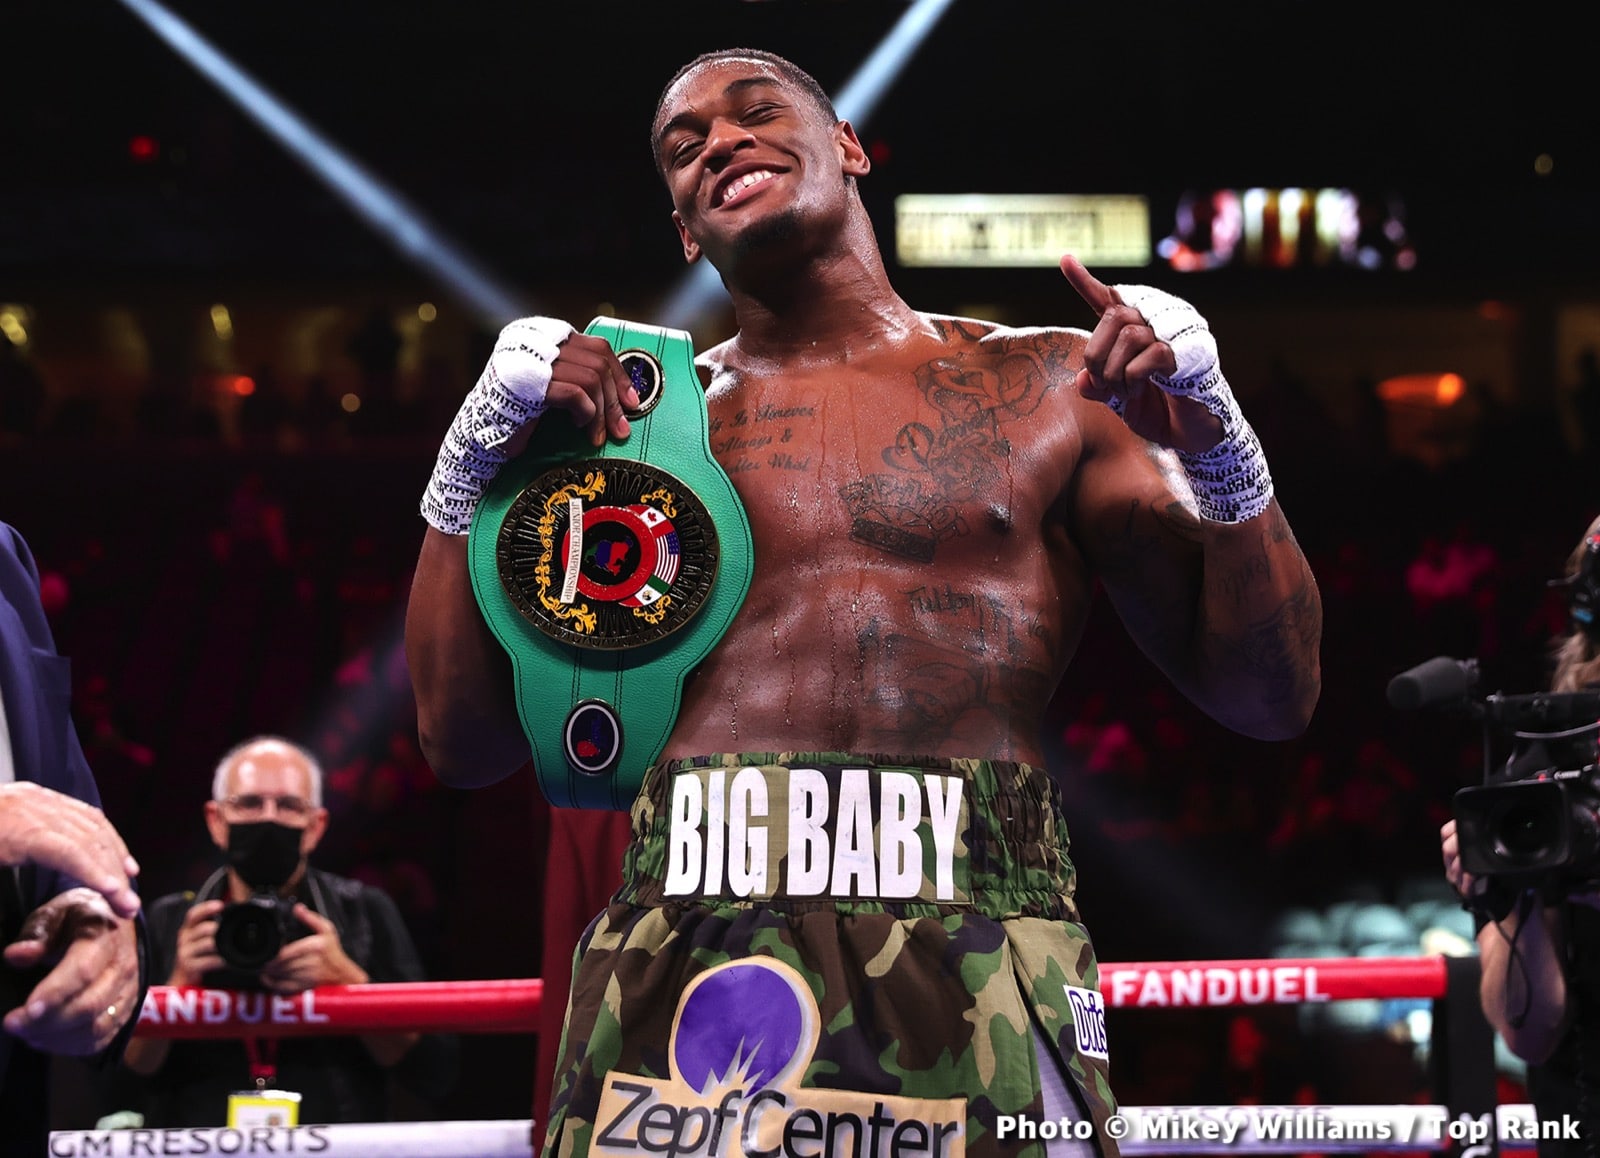 Bob Arum, Deontay Wilder, Jared Anderson boxing image / photo